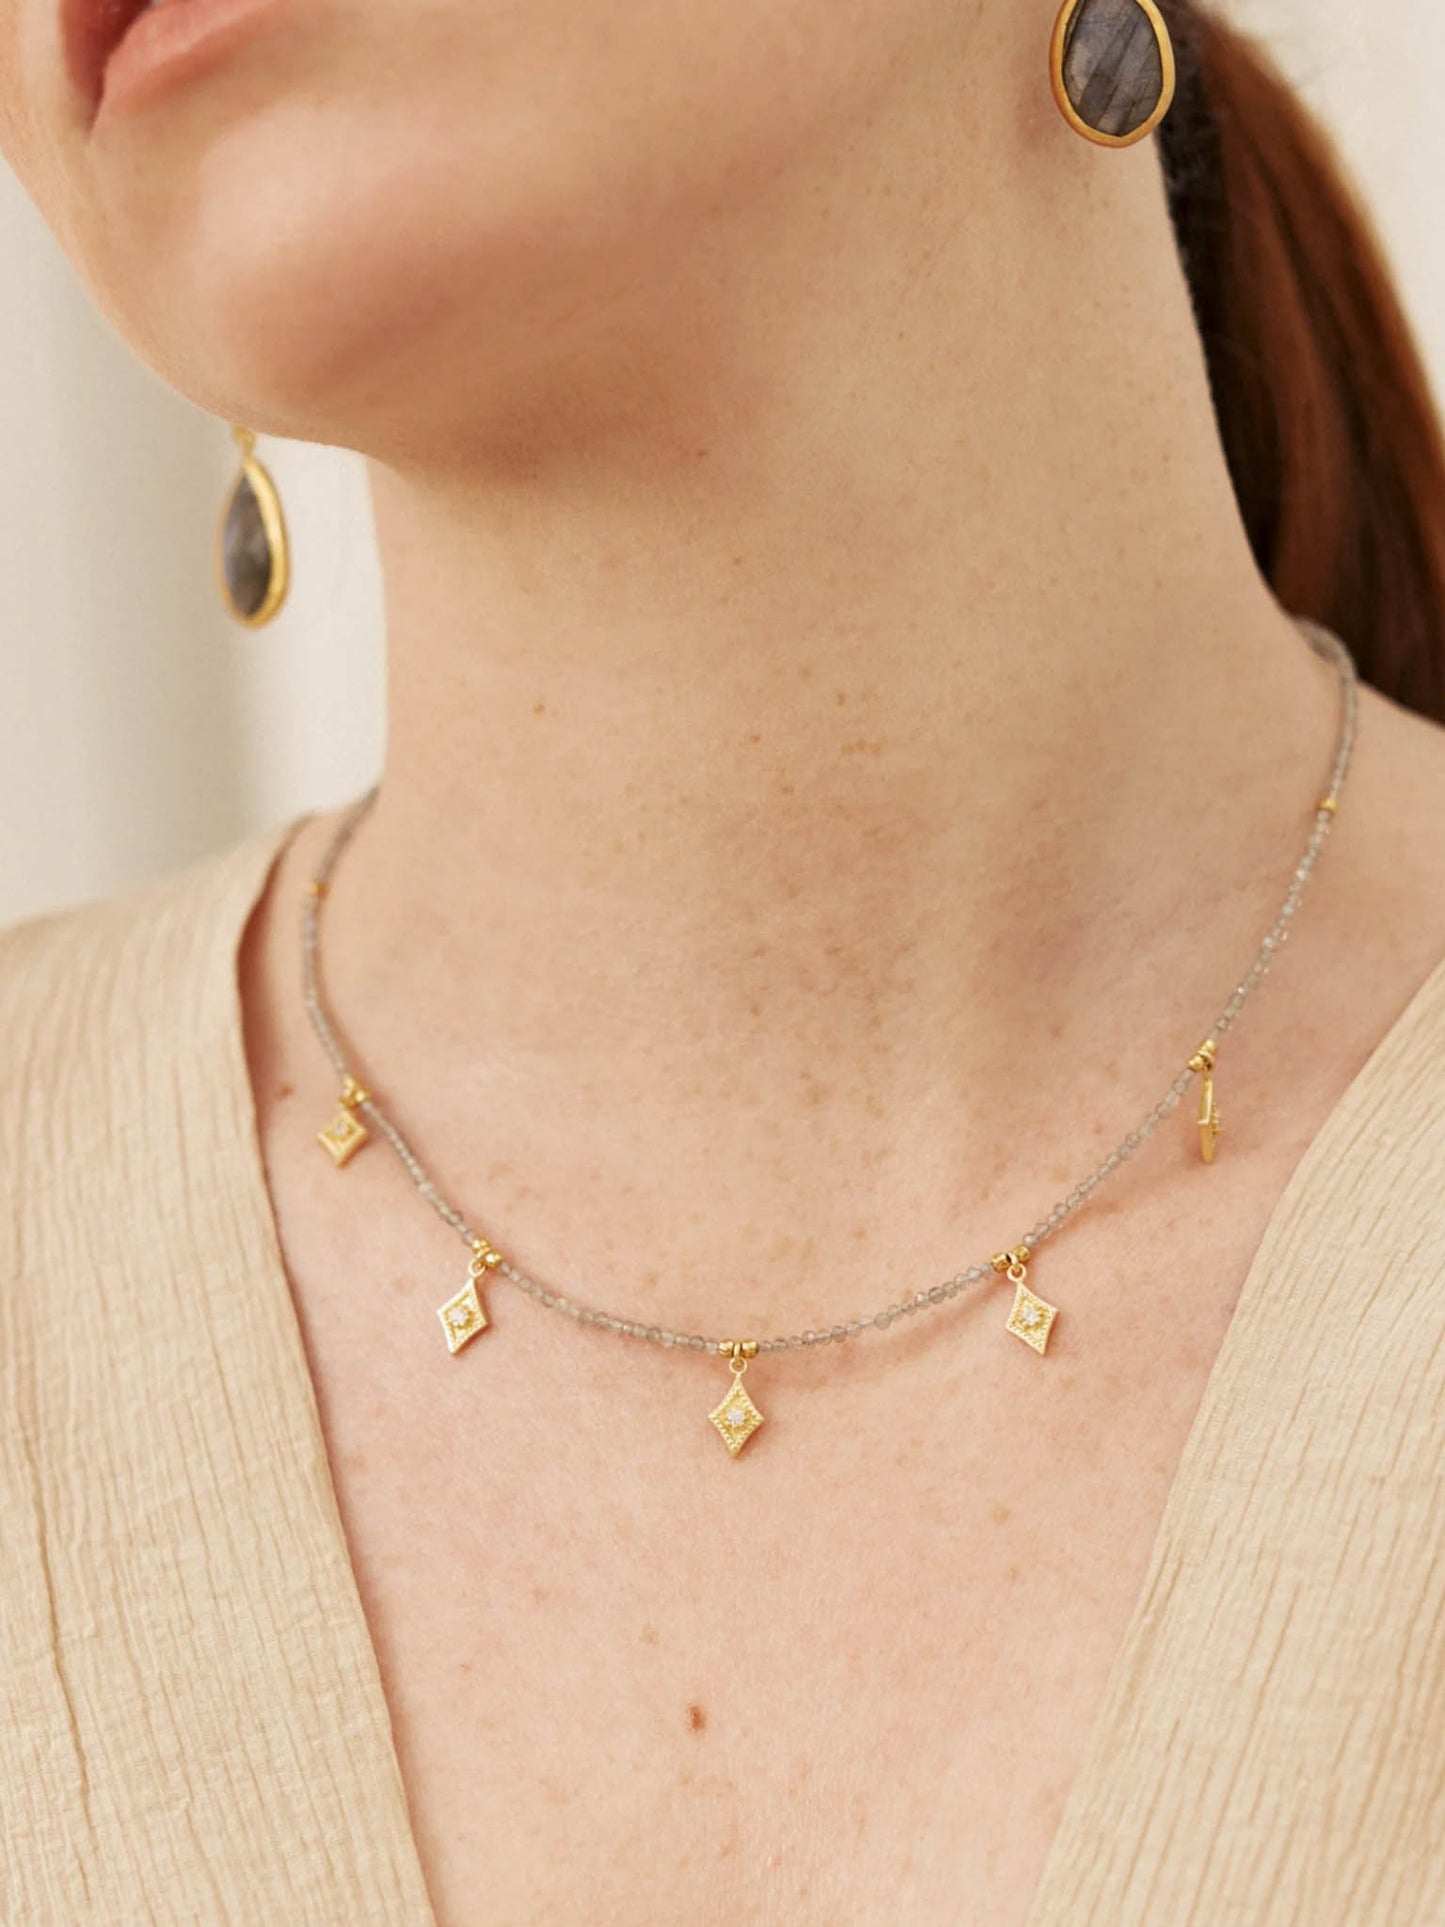 Close up of ladies neck wearing Carousel Jewels Golden Charm Labradorite Necklace